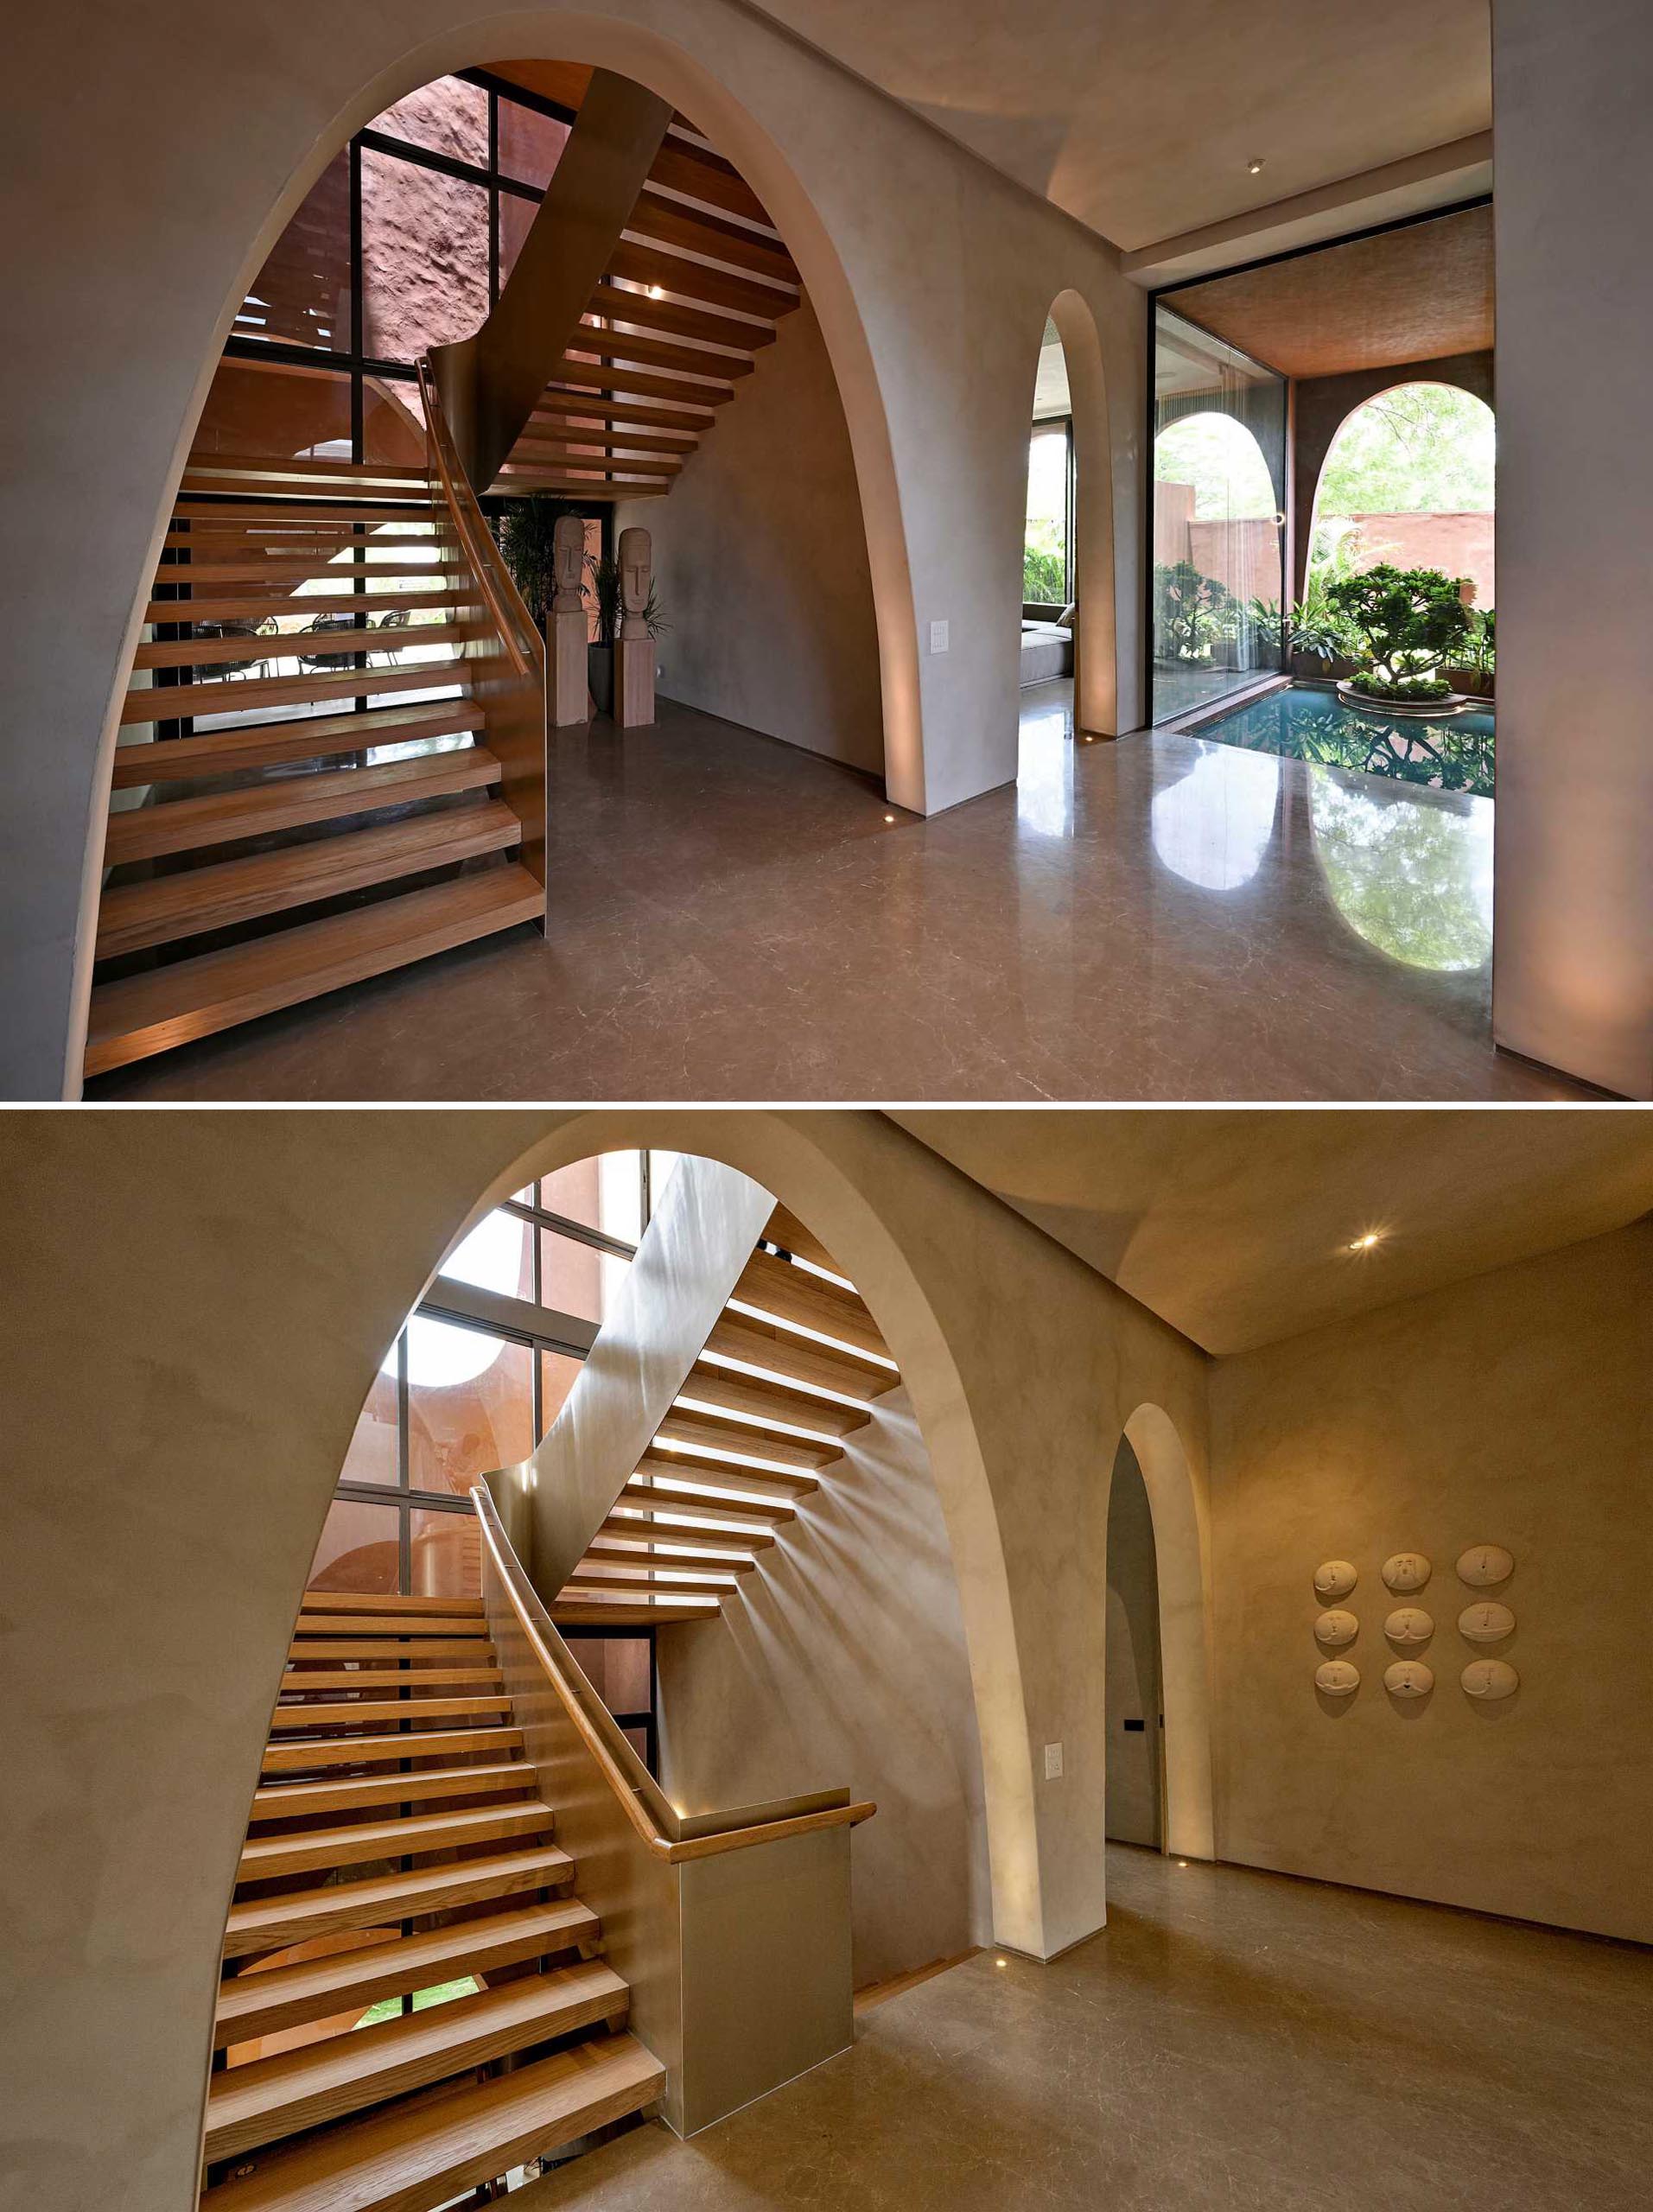 This modern wood and metal staircase connects the various levels of the home, with each level being greeted by an arch.